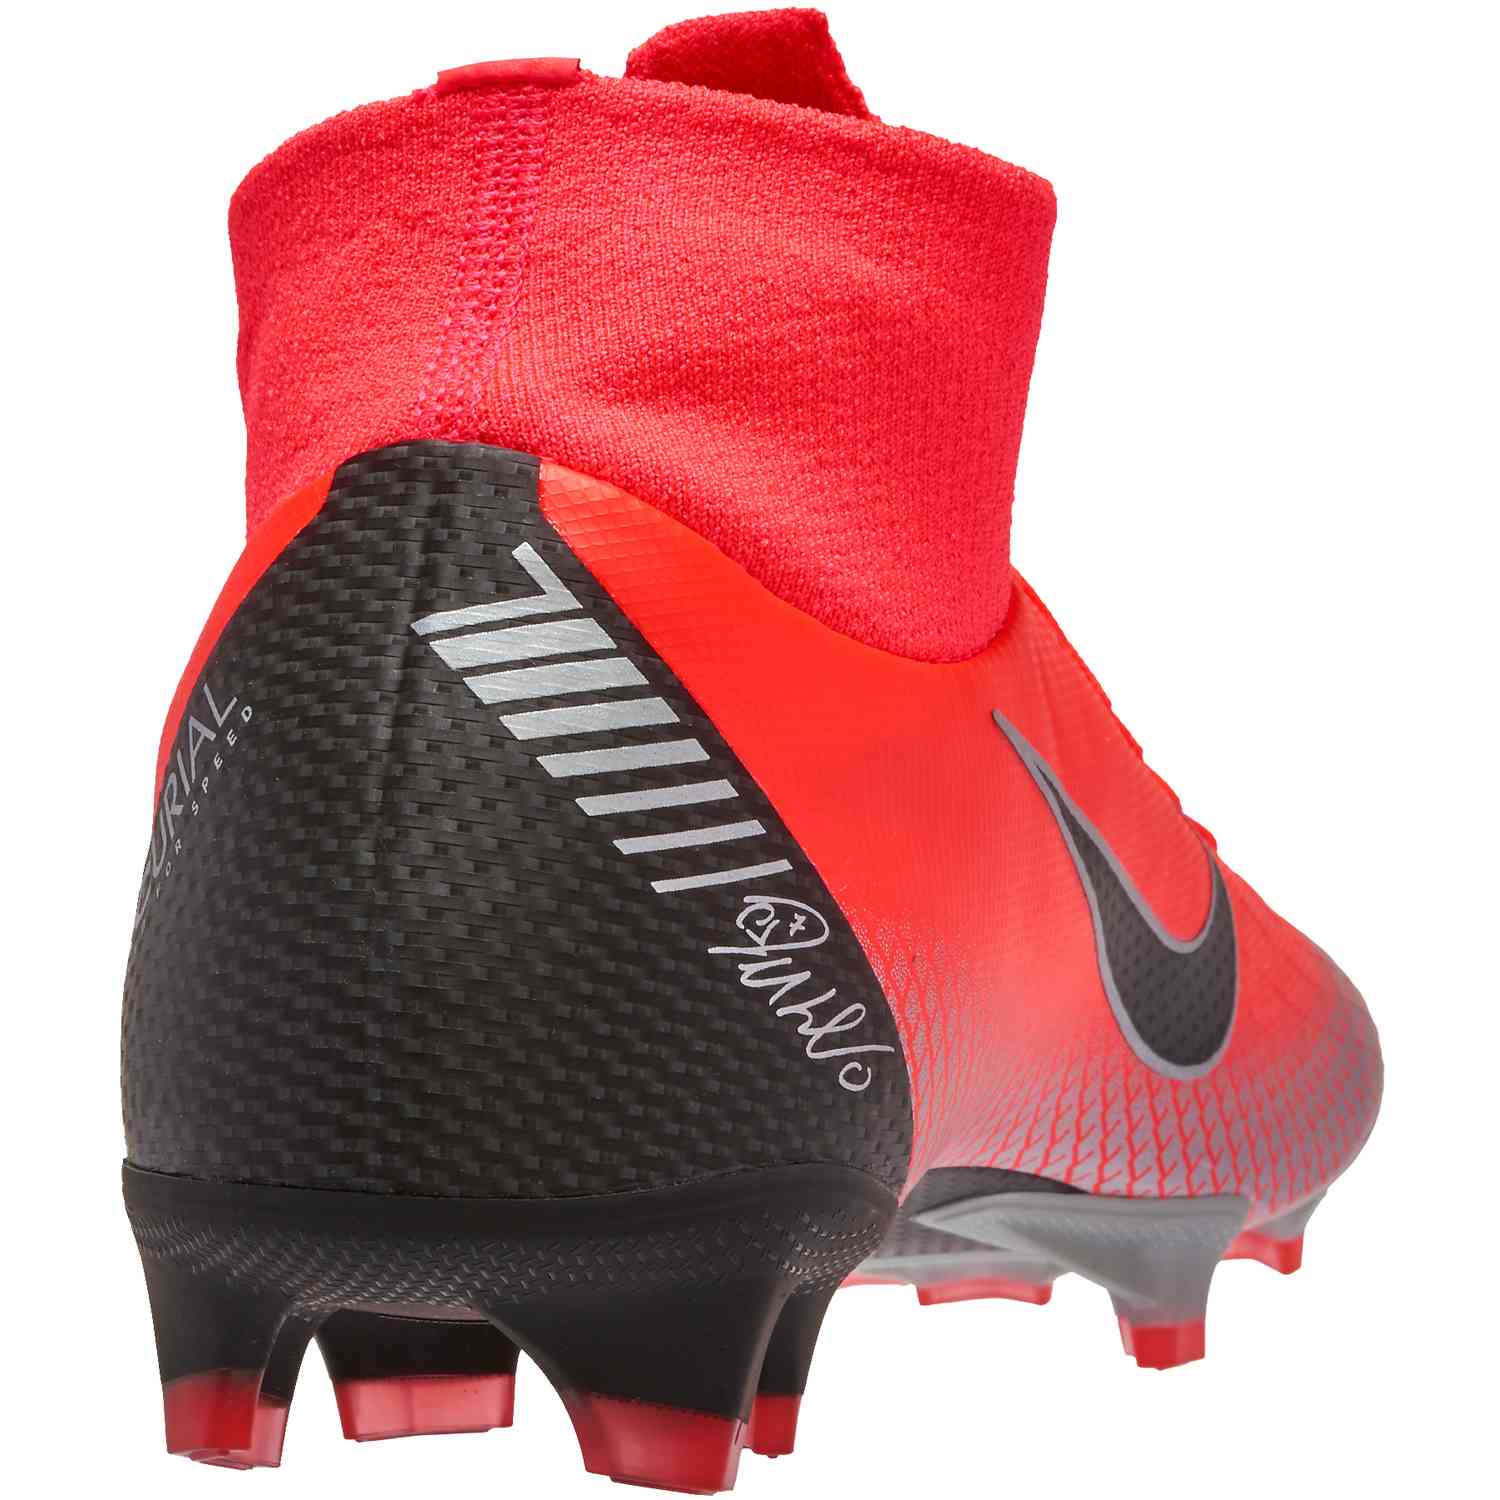 Nike Superfly 6 Pro FG Firm Ground Soccer Cleat. Pinterest